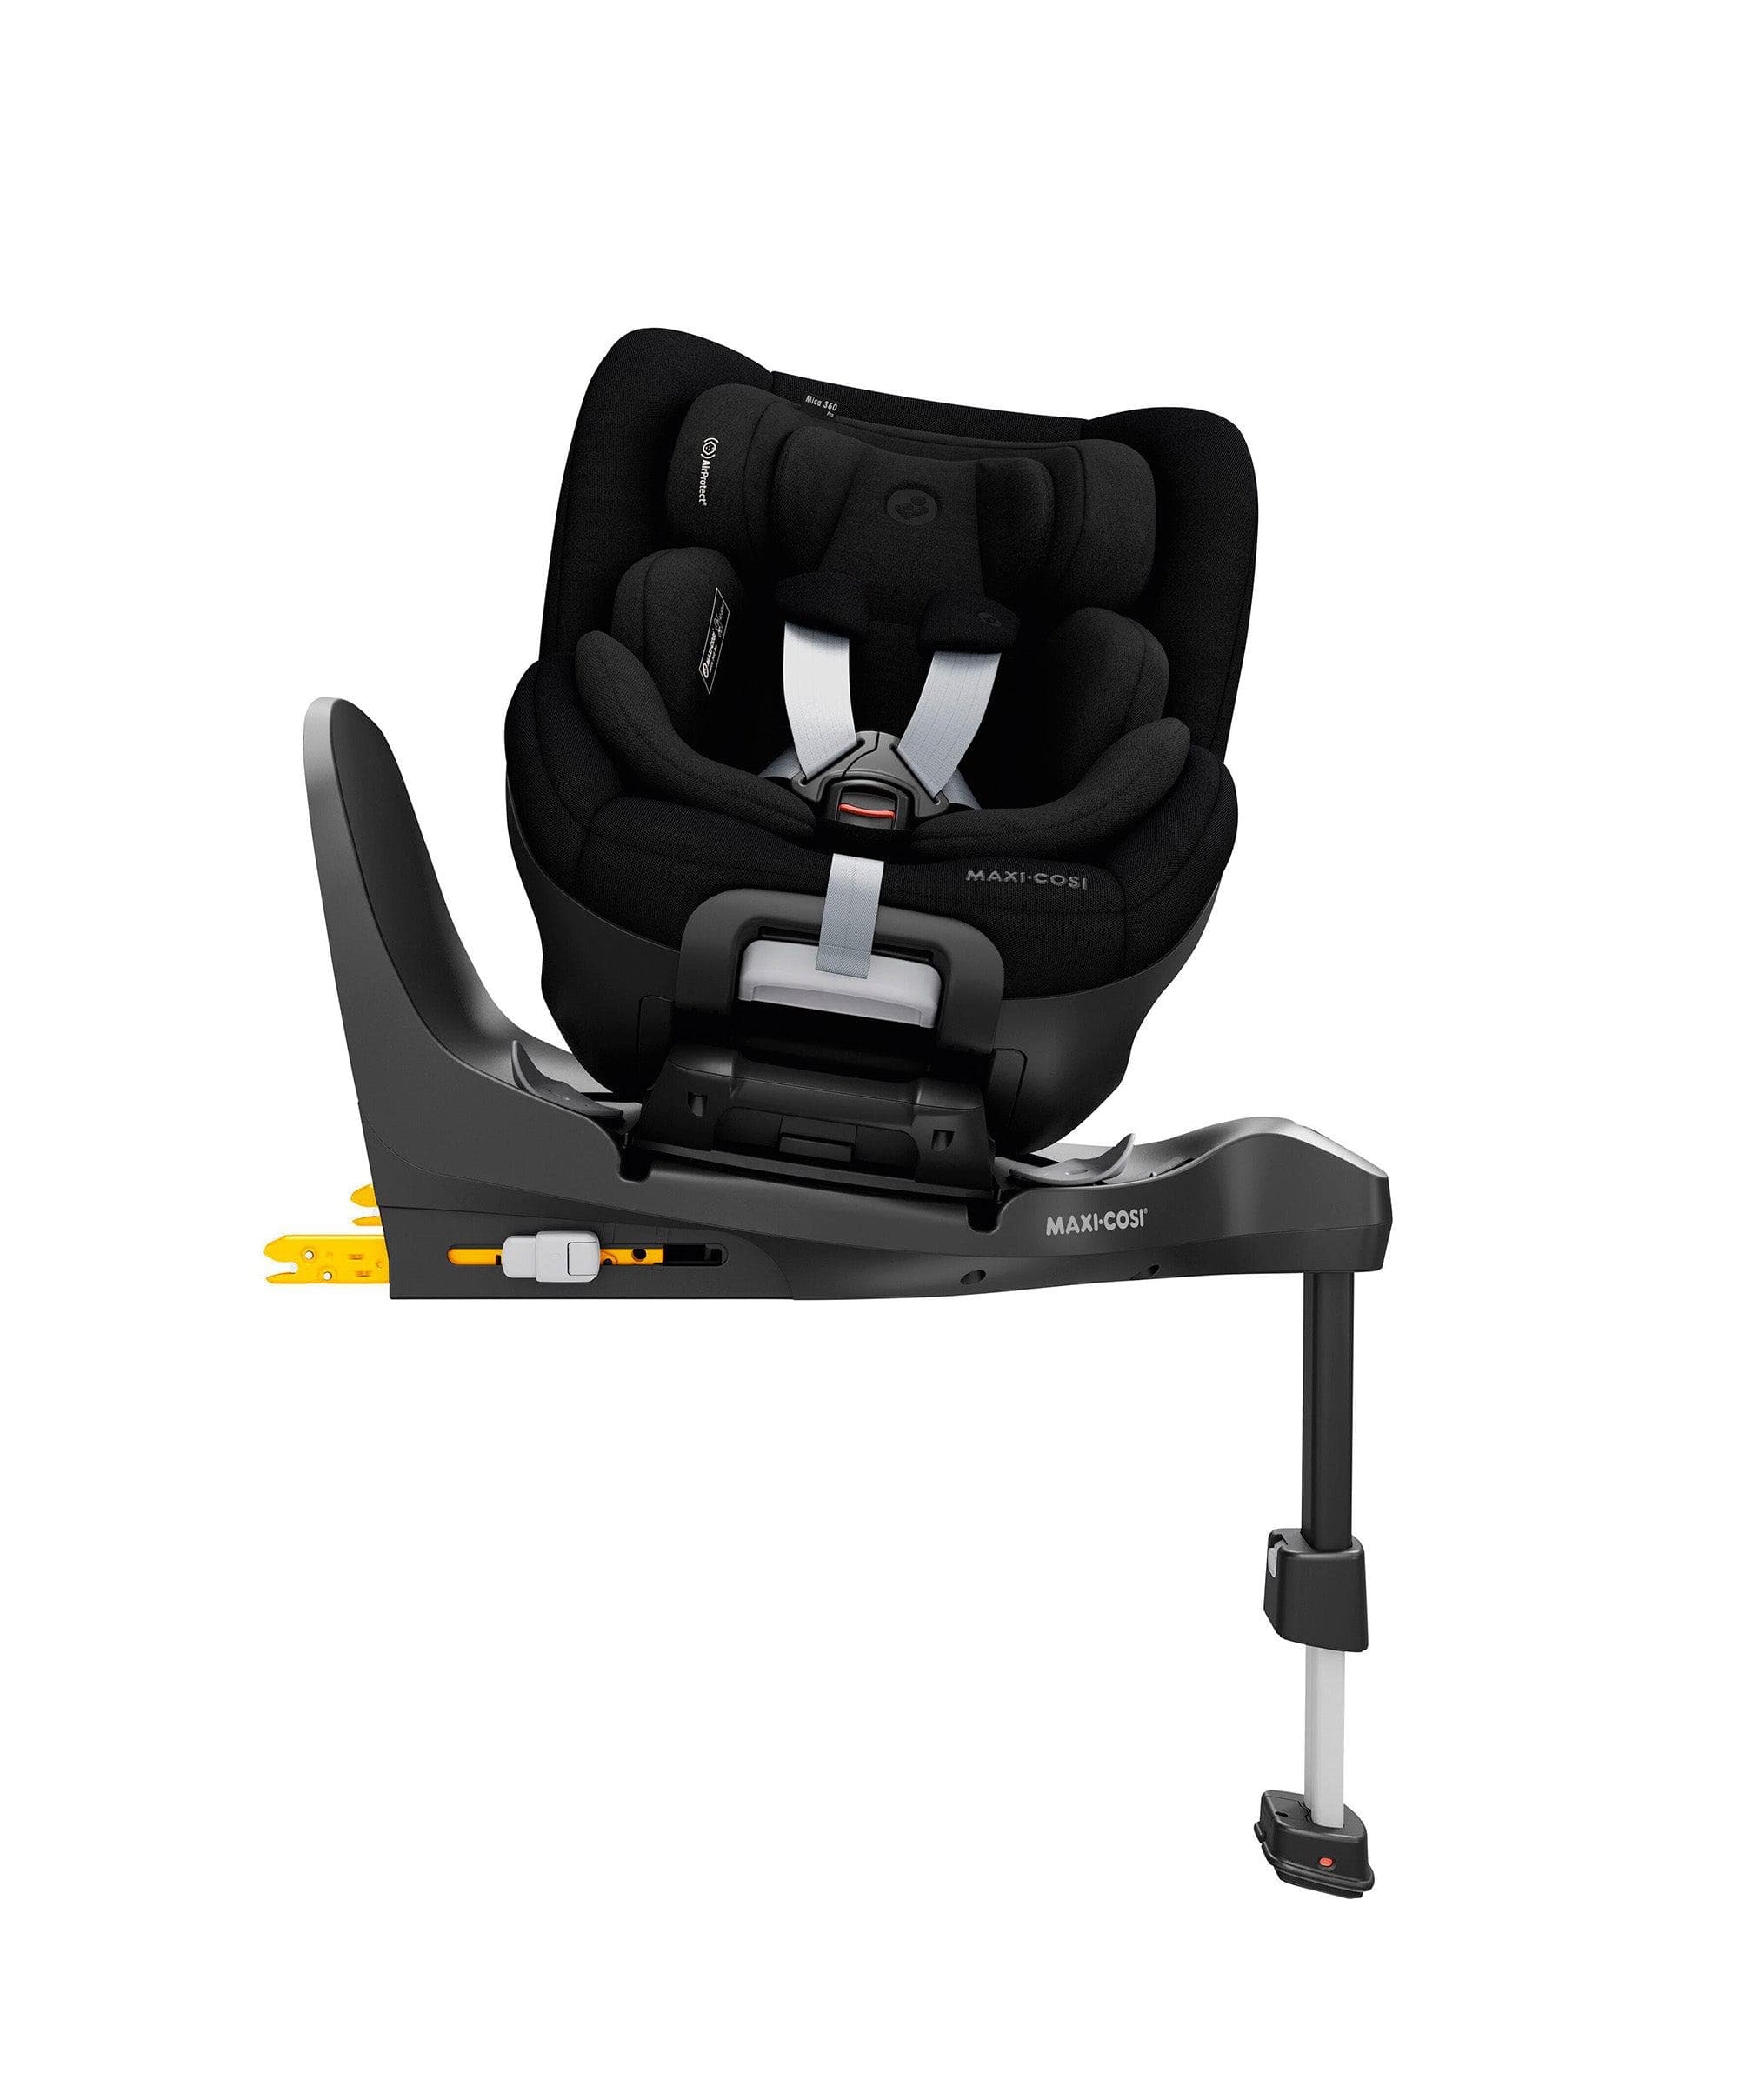 Order the Maxi-Cosi Mica 360 Pro Car Seat online - Baby Plus